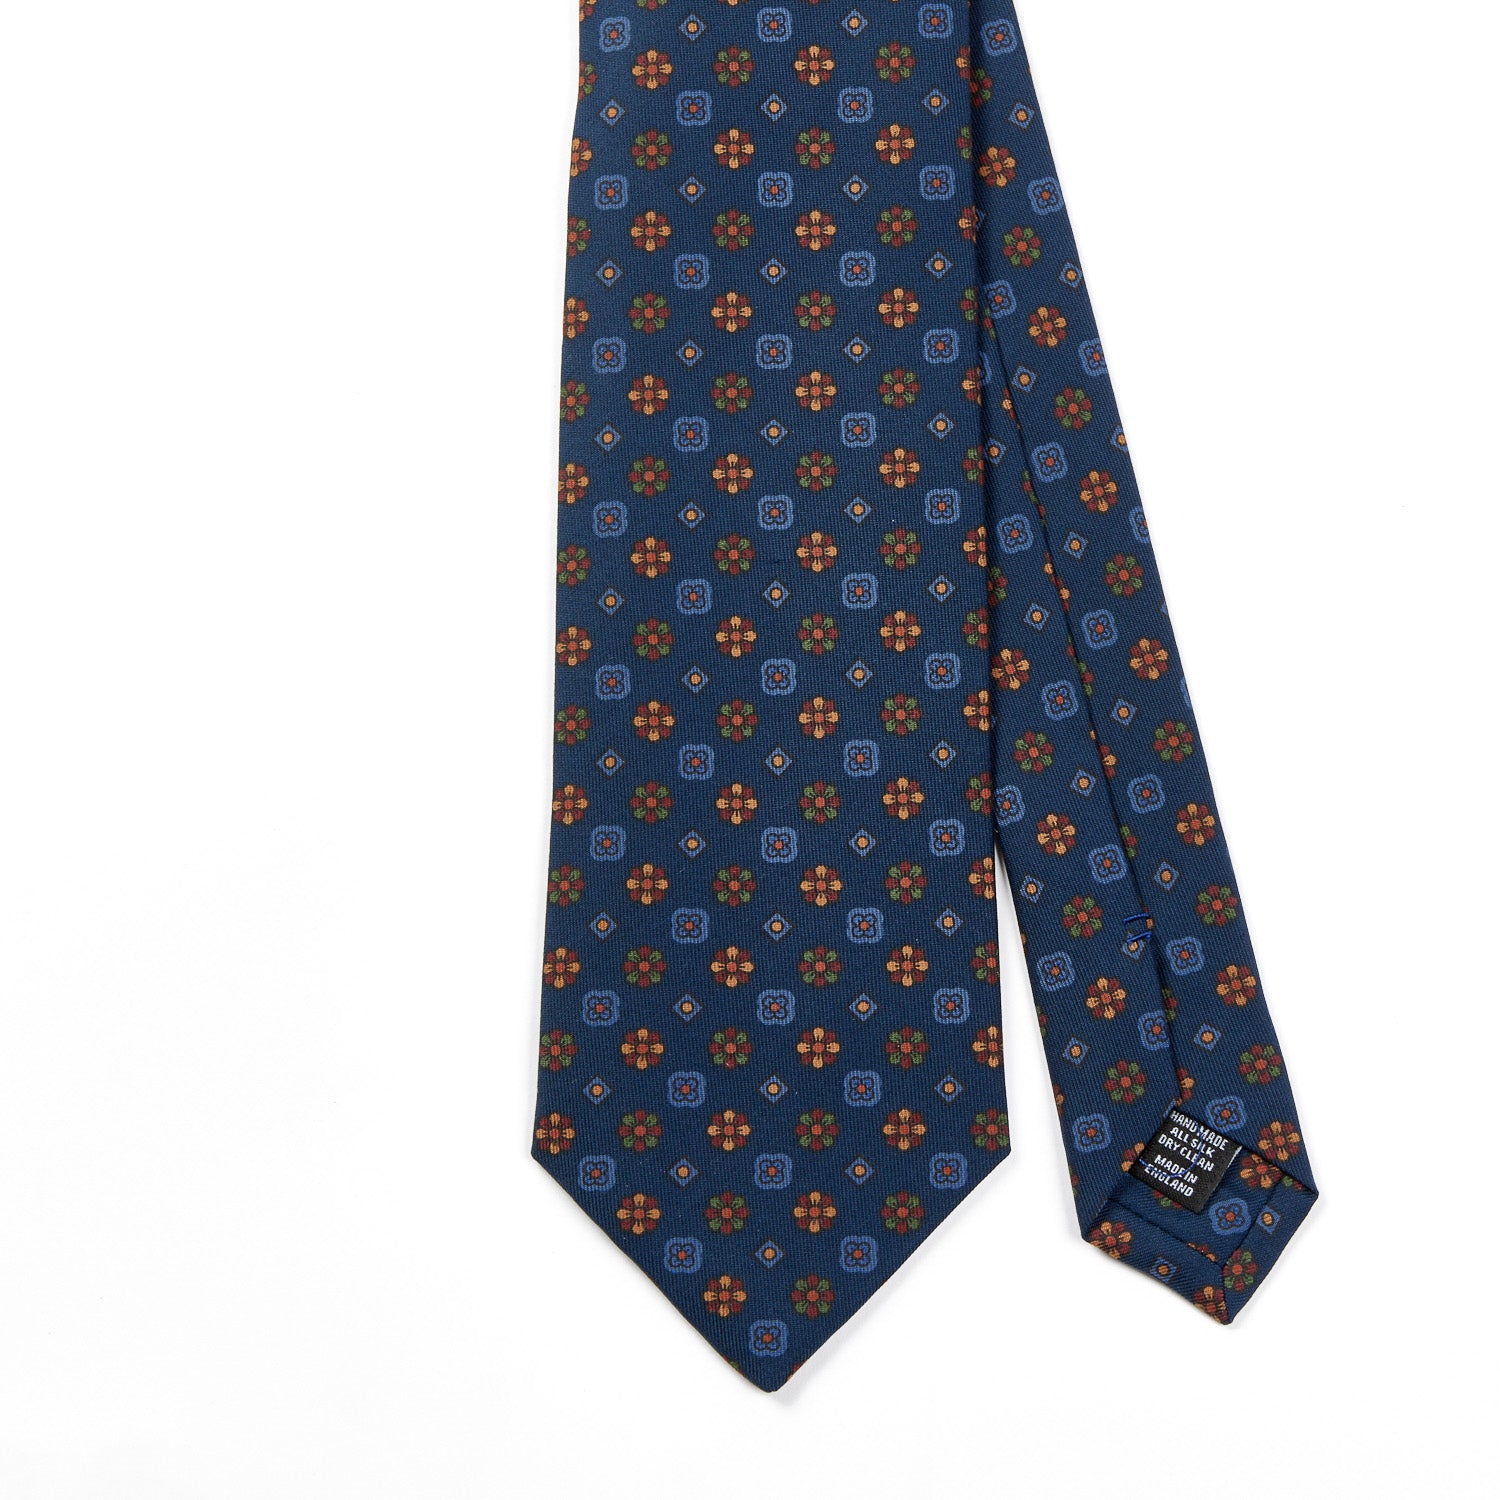 A Sovereign Grade Blue Mixed Floret Ancient Madder Tie with quality flowers on it from KirbyAllison.com.